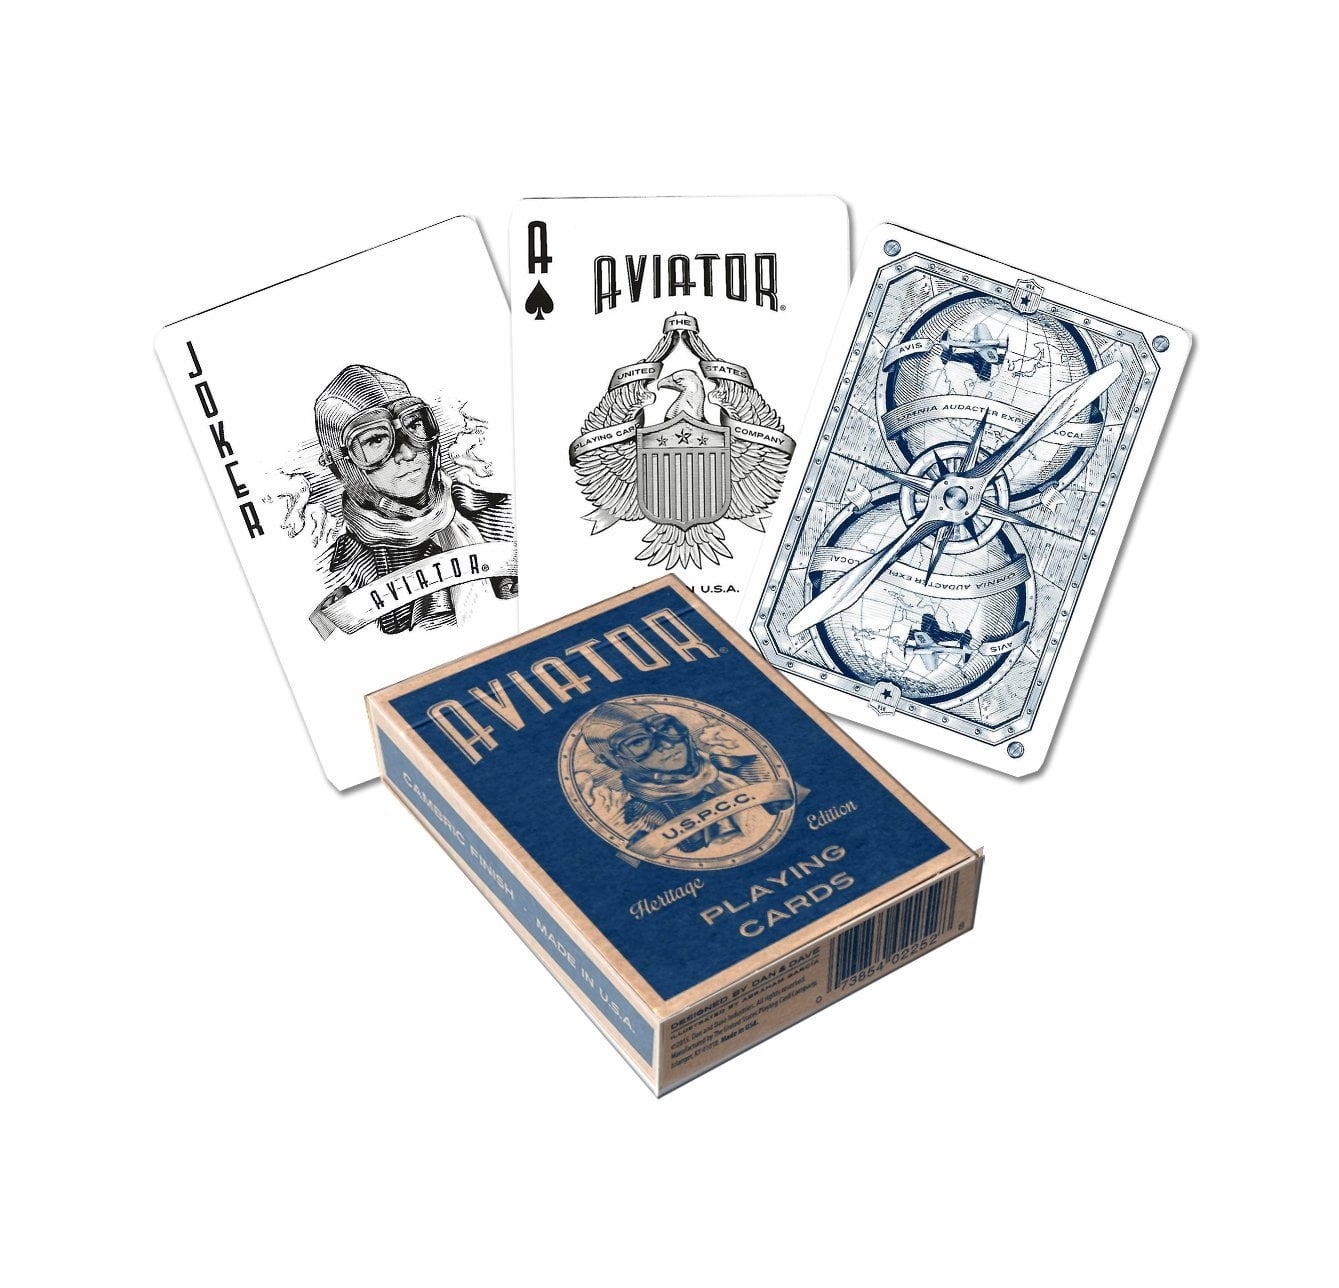 1 DECK Aviator Heritage Edition playing cards FREE USA SHIPPING! 